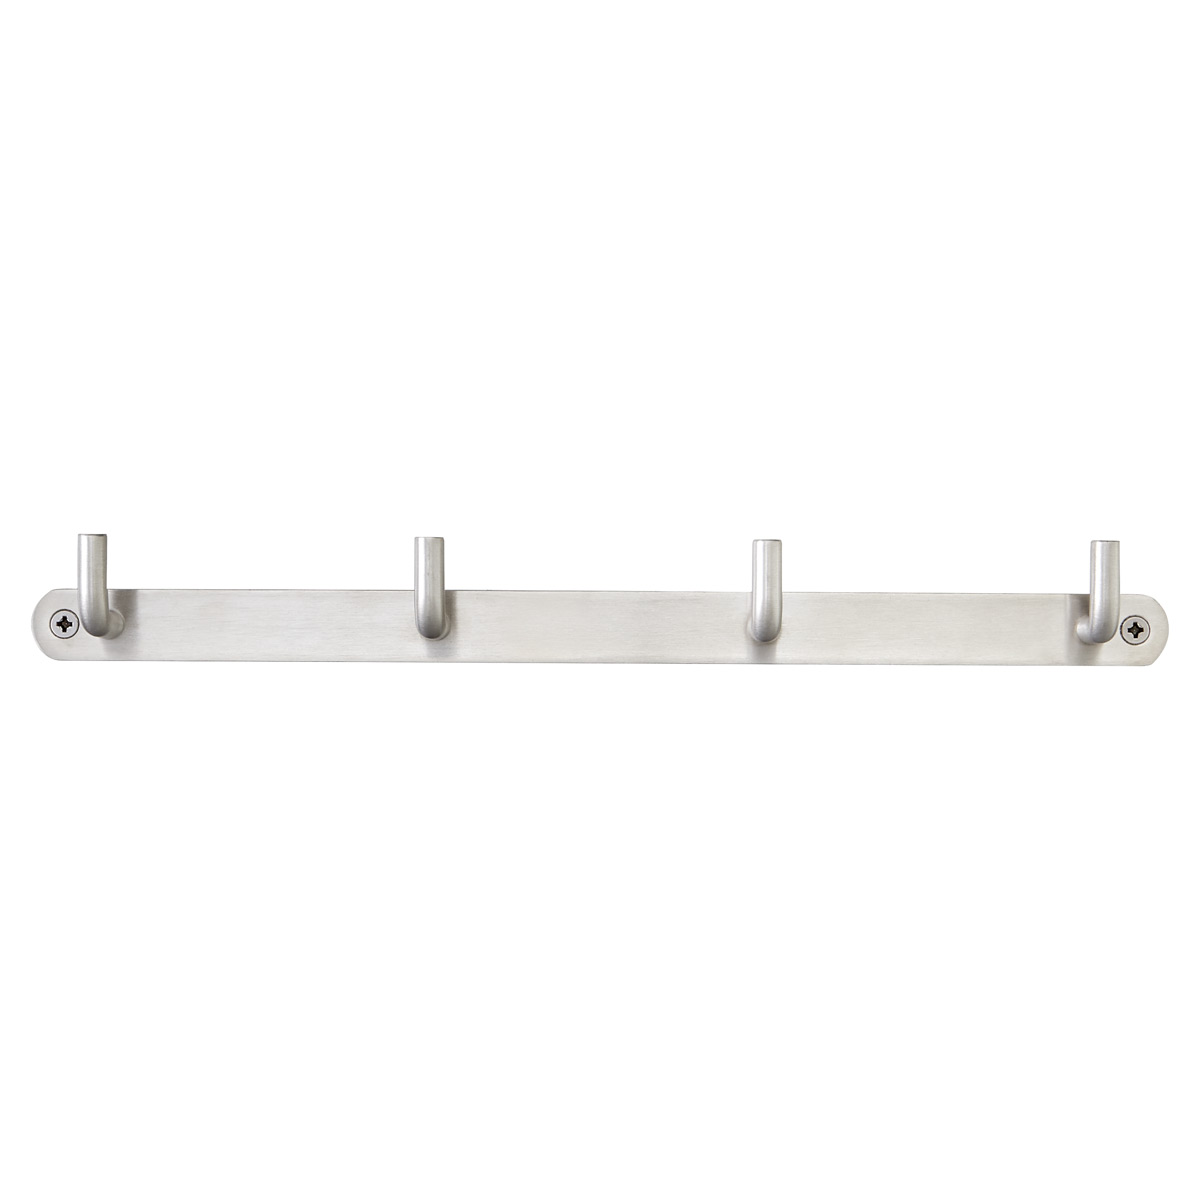 https://www.containerstore.com/catalogimages/313274/10007060Deco4HookRackStainless_1200.jpg